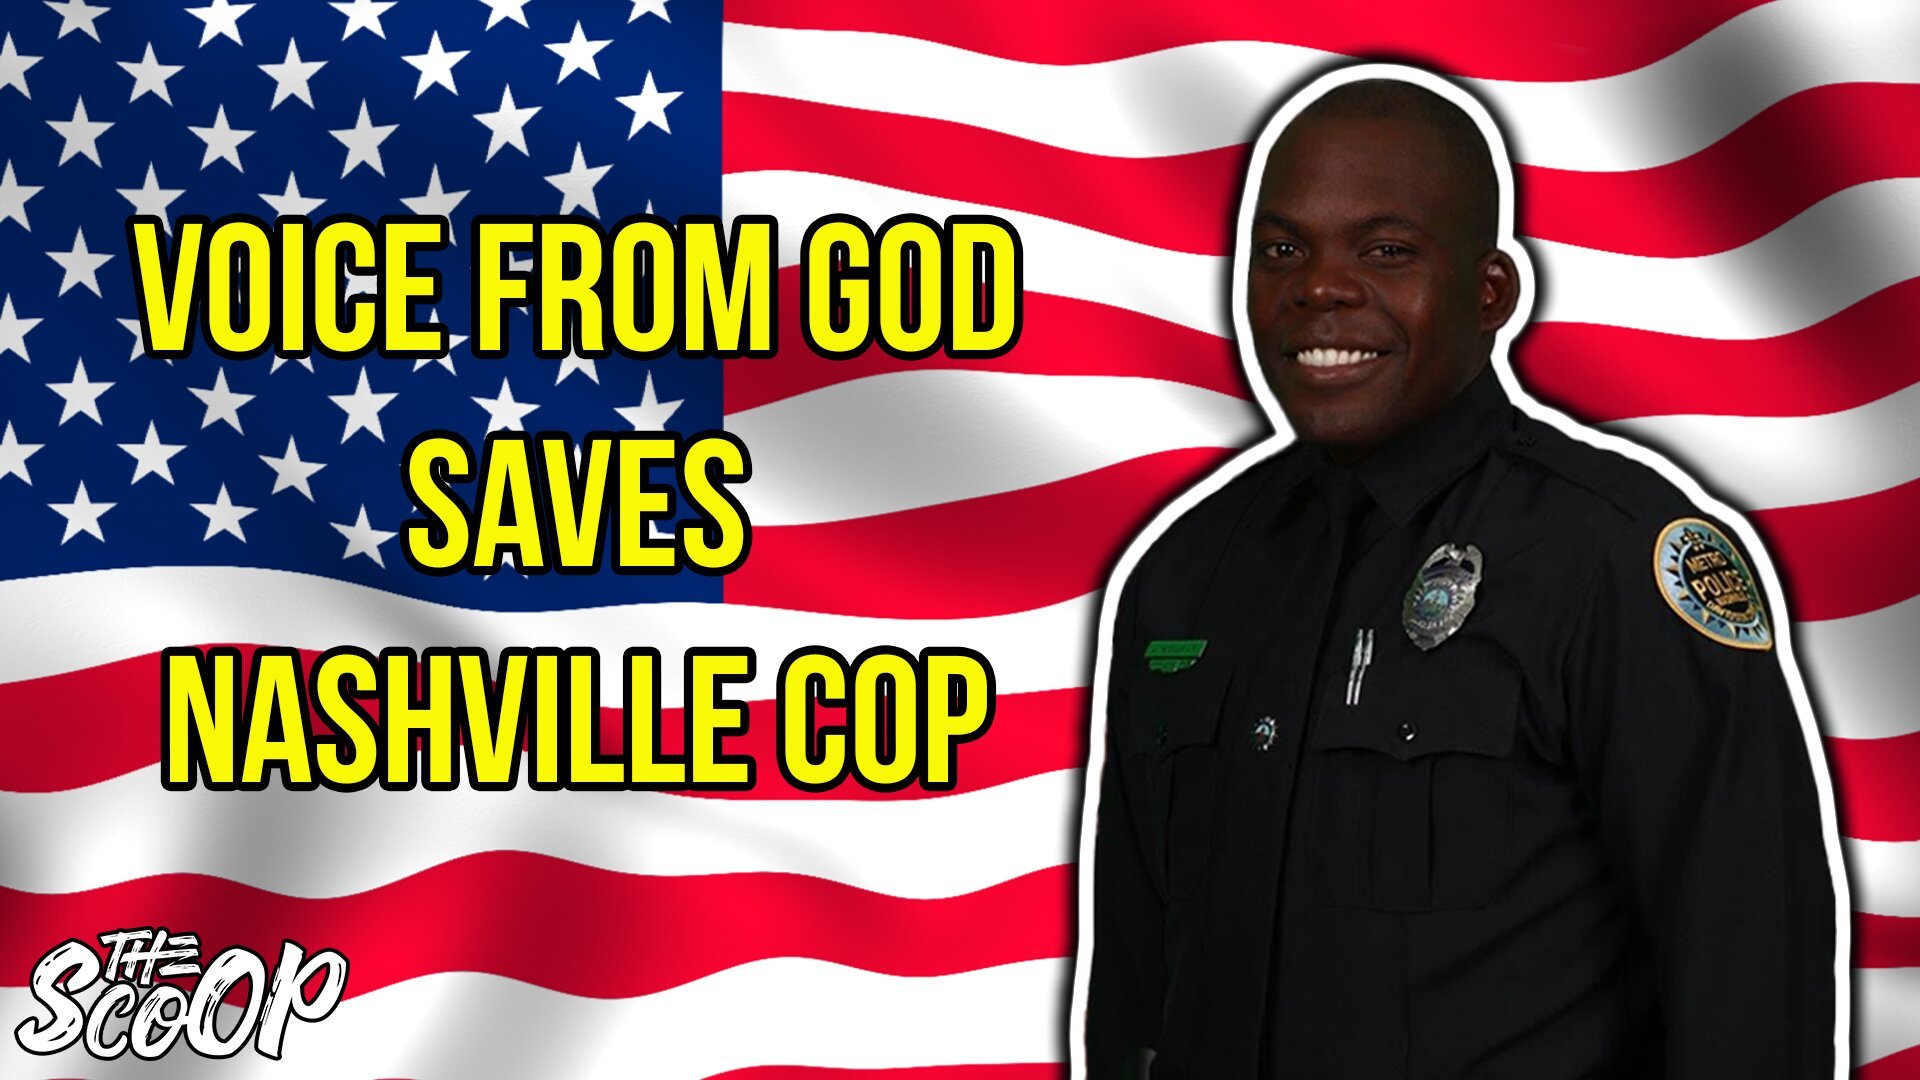  WATCH: Nashville Cop Claims He Heard Message From God That Saved Him From RV Explosion (VIDEO)